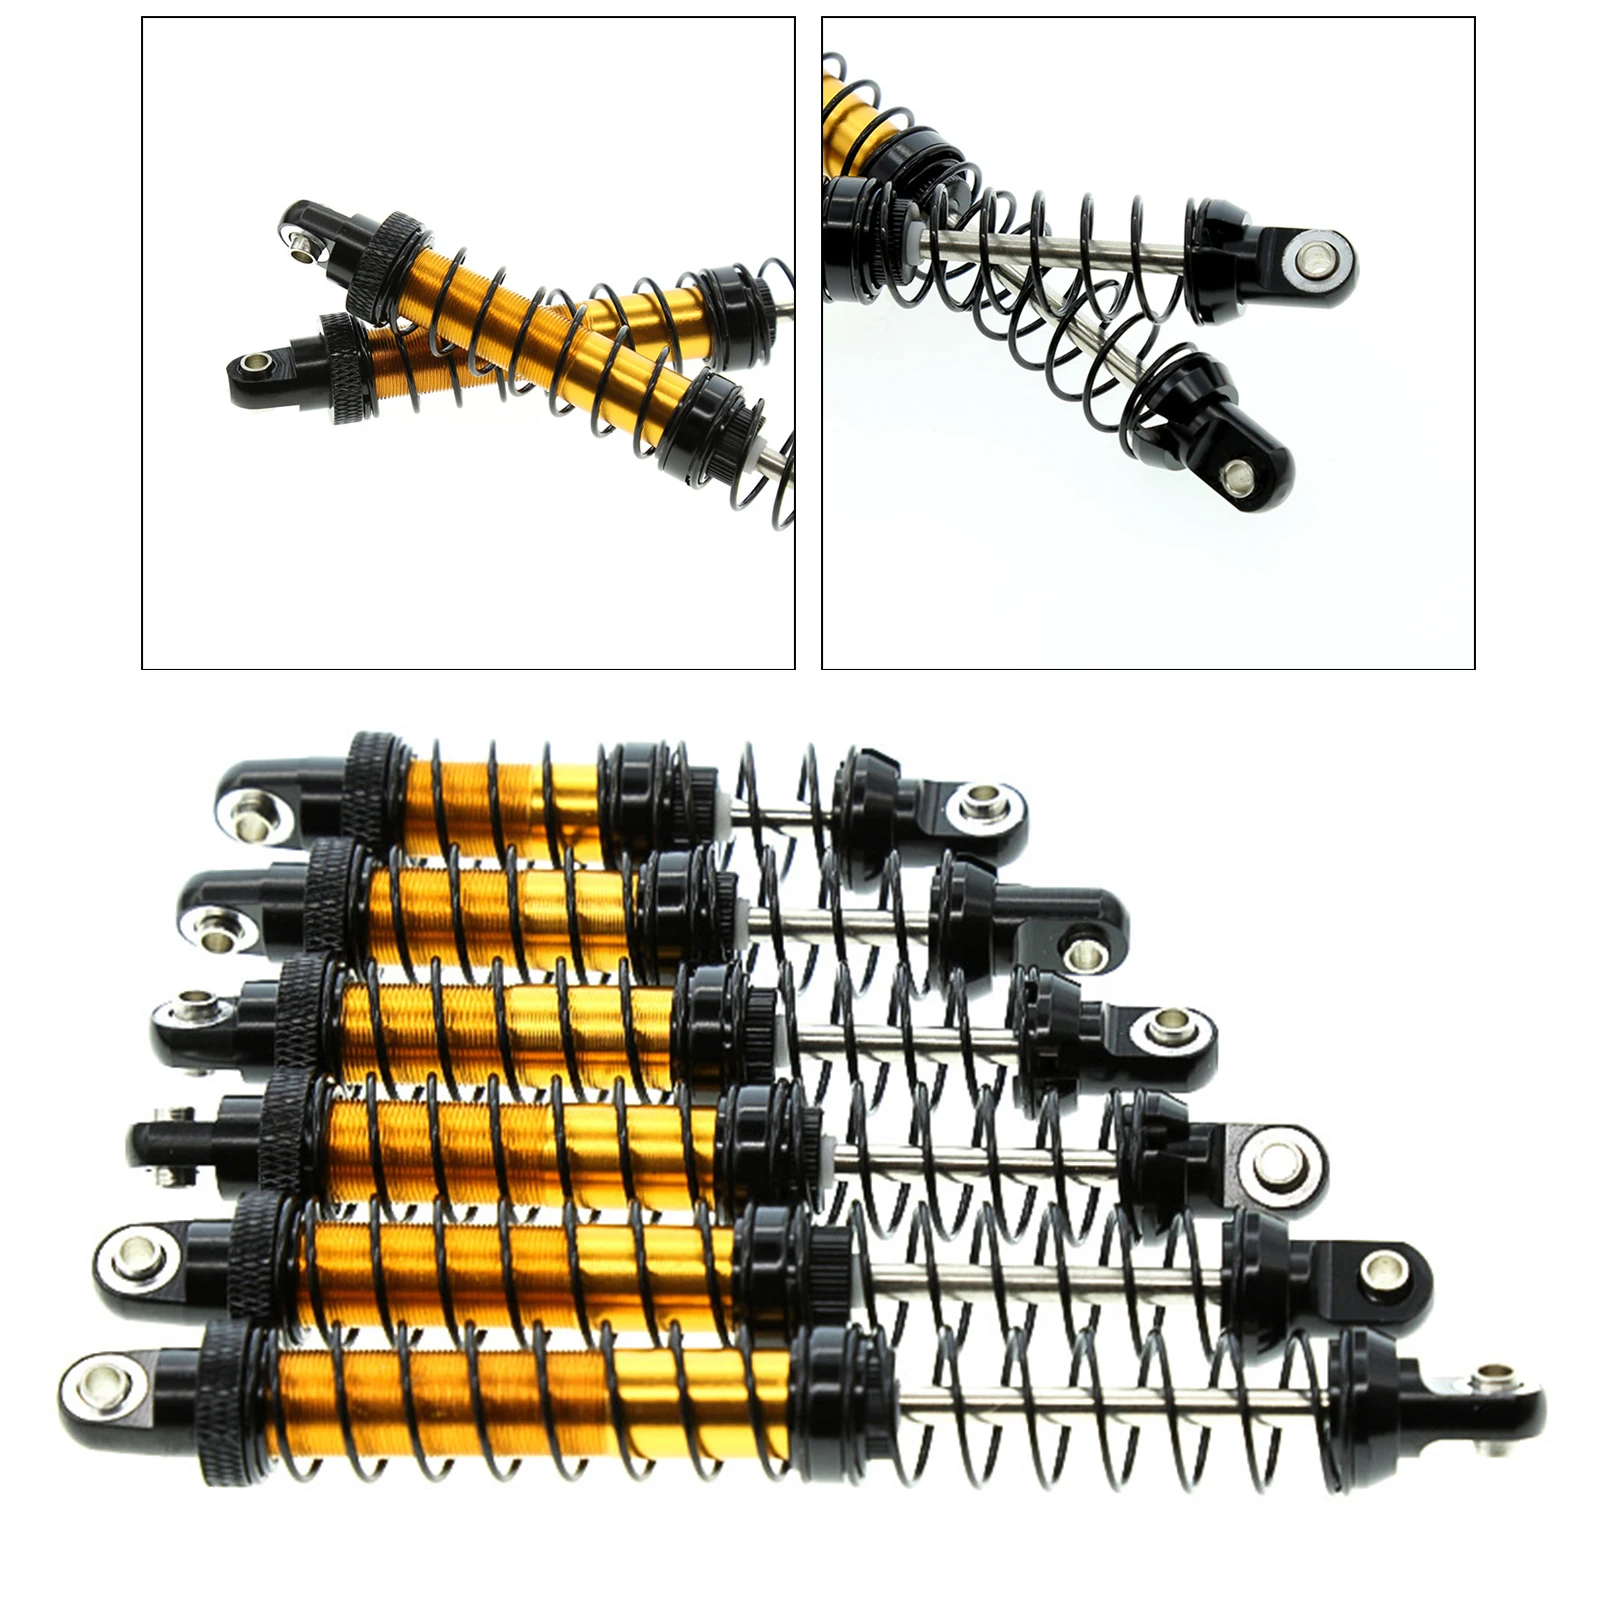 

4pcs Hydraulic Shock Absorber Front & Rear, Metal Assembled Springs Damper for TRX4 SCX10 90046 1/10 RC Cars Upgrades